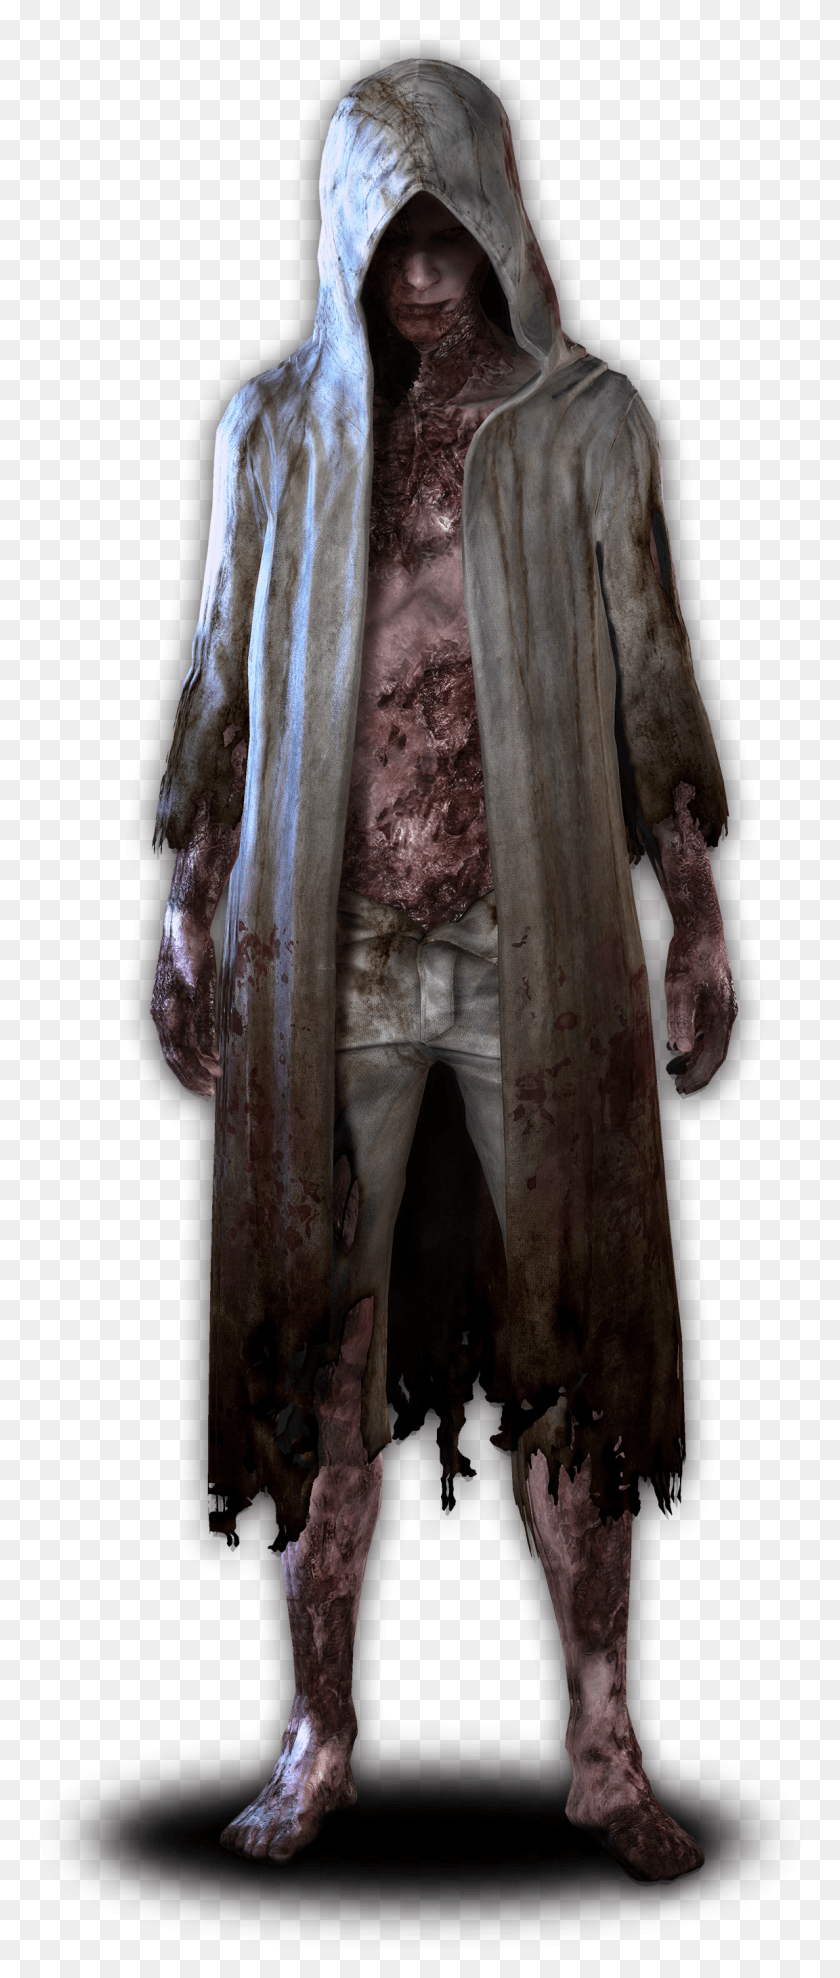 1152x2834 Ruvick The Evil Within Horror Games Zombies Survival Ruvik Полное Тело, Одежда, Одежда, Плащ Hd Png Скачать